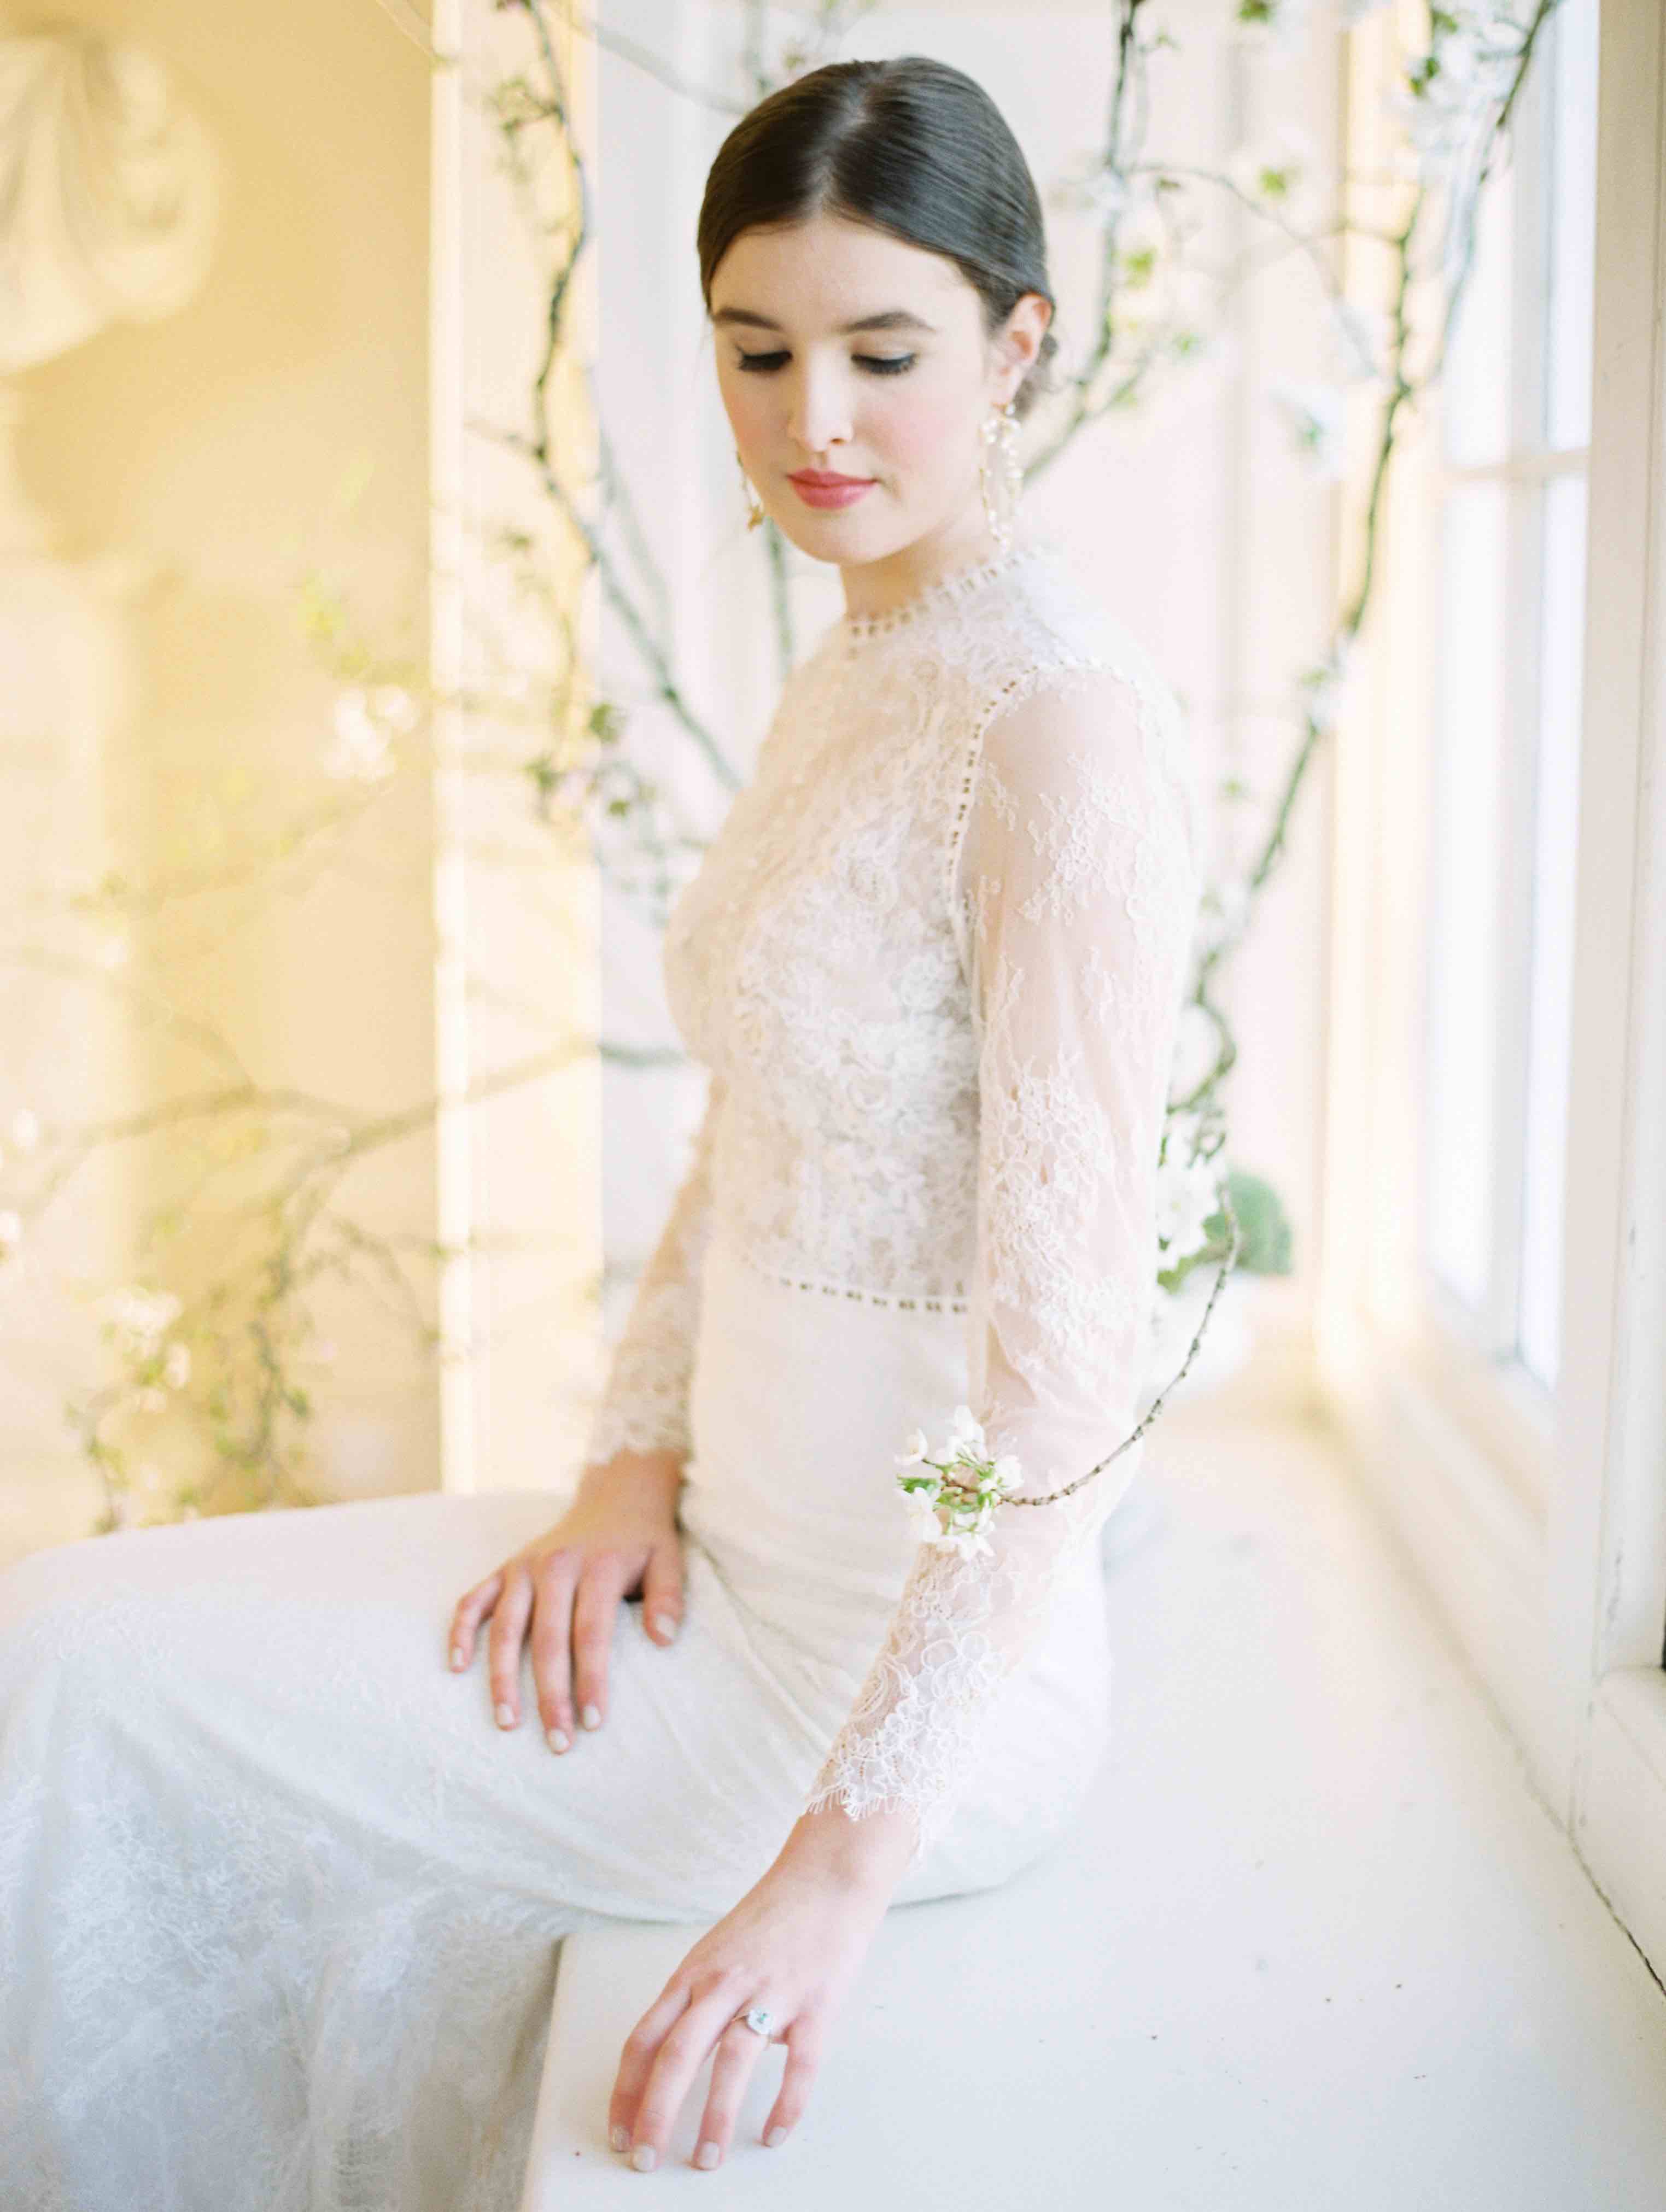 Elegant and refined bridal look | The Timeless Stylist | Hannah Duffy